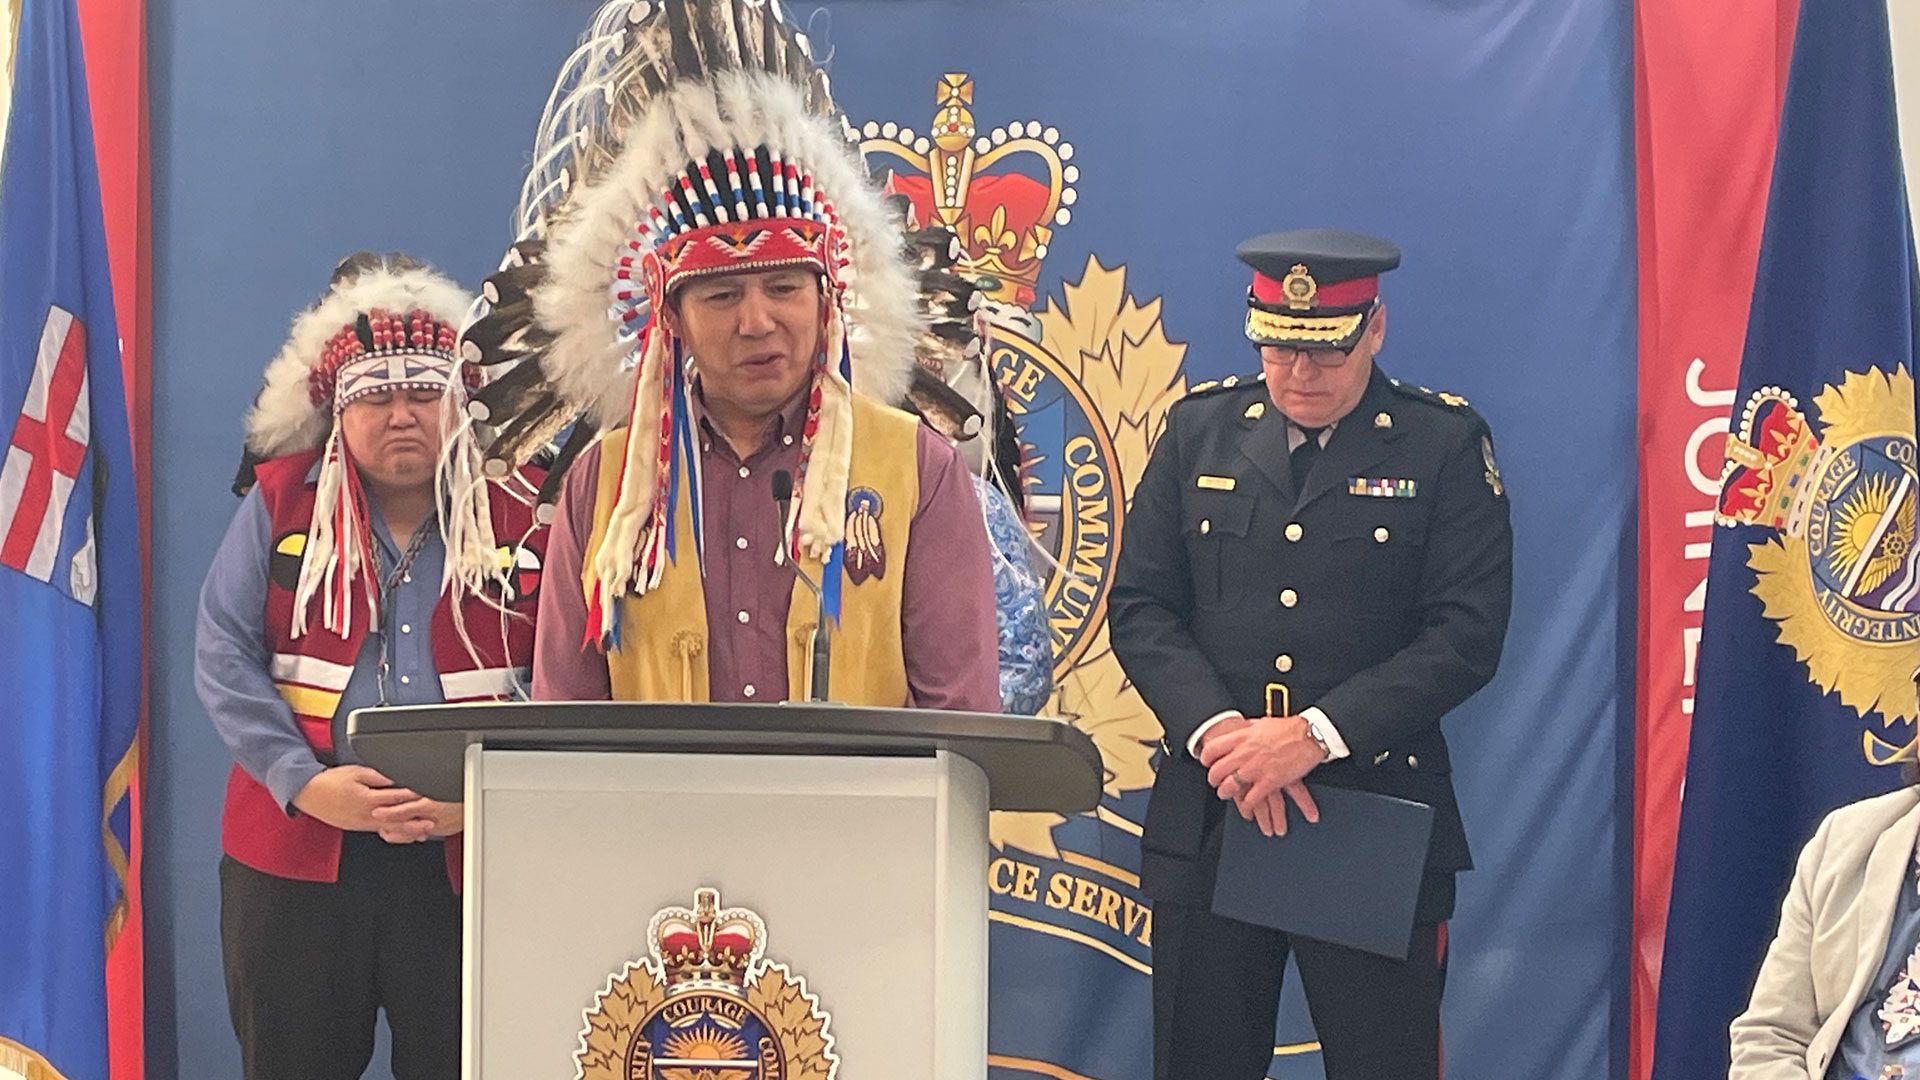 Grand Chief Arthur Noskey wearing a headdress in front of Police Chief Dale Mcphee